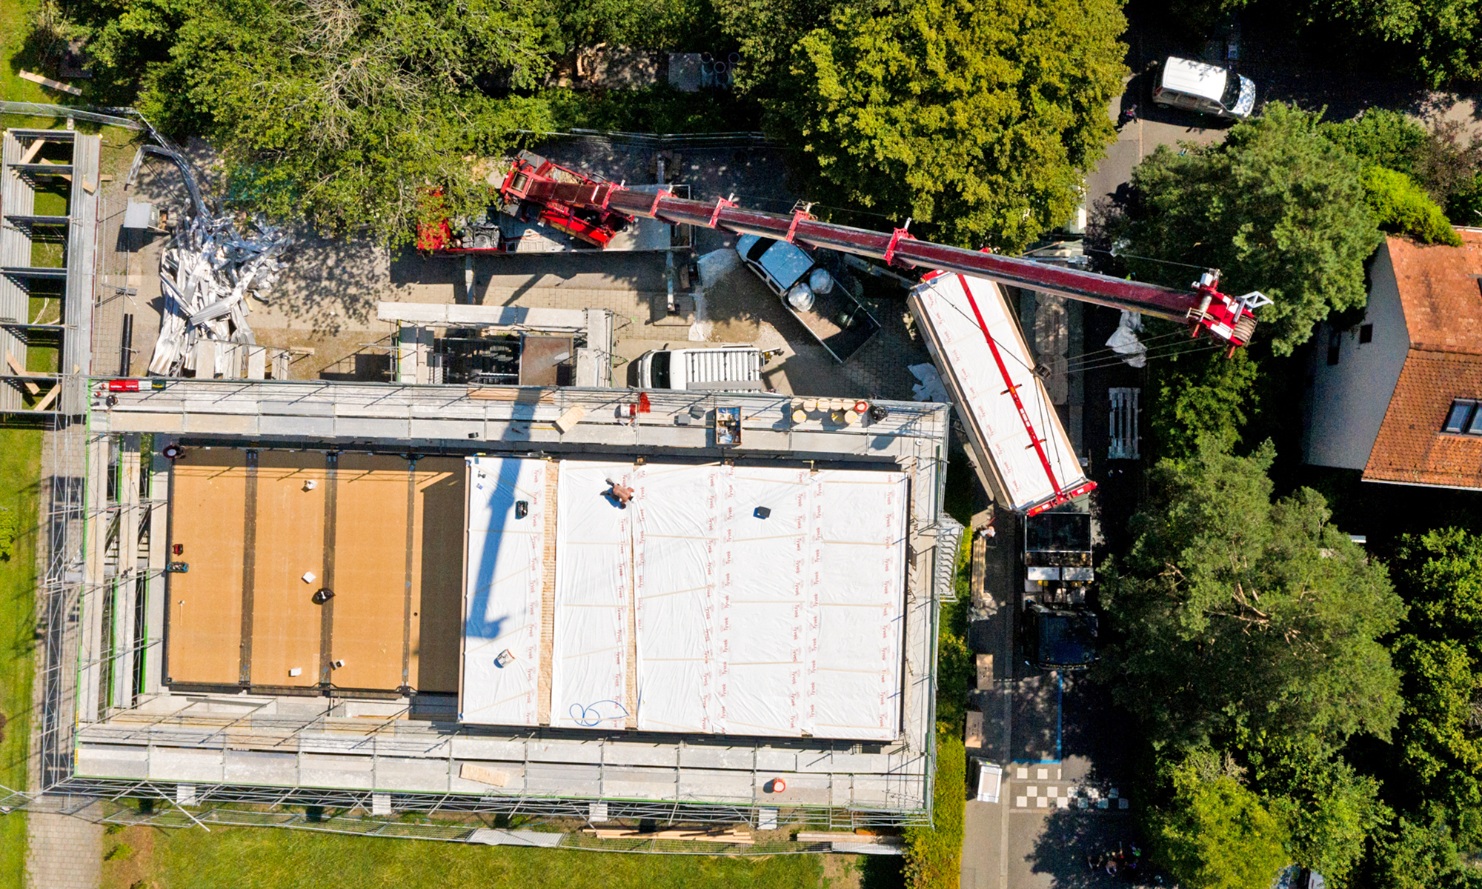 Aerial photograph – from above, it is possible to see the five timber modules already hoisted by crane onto the roof of the school building and moved into place.